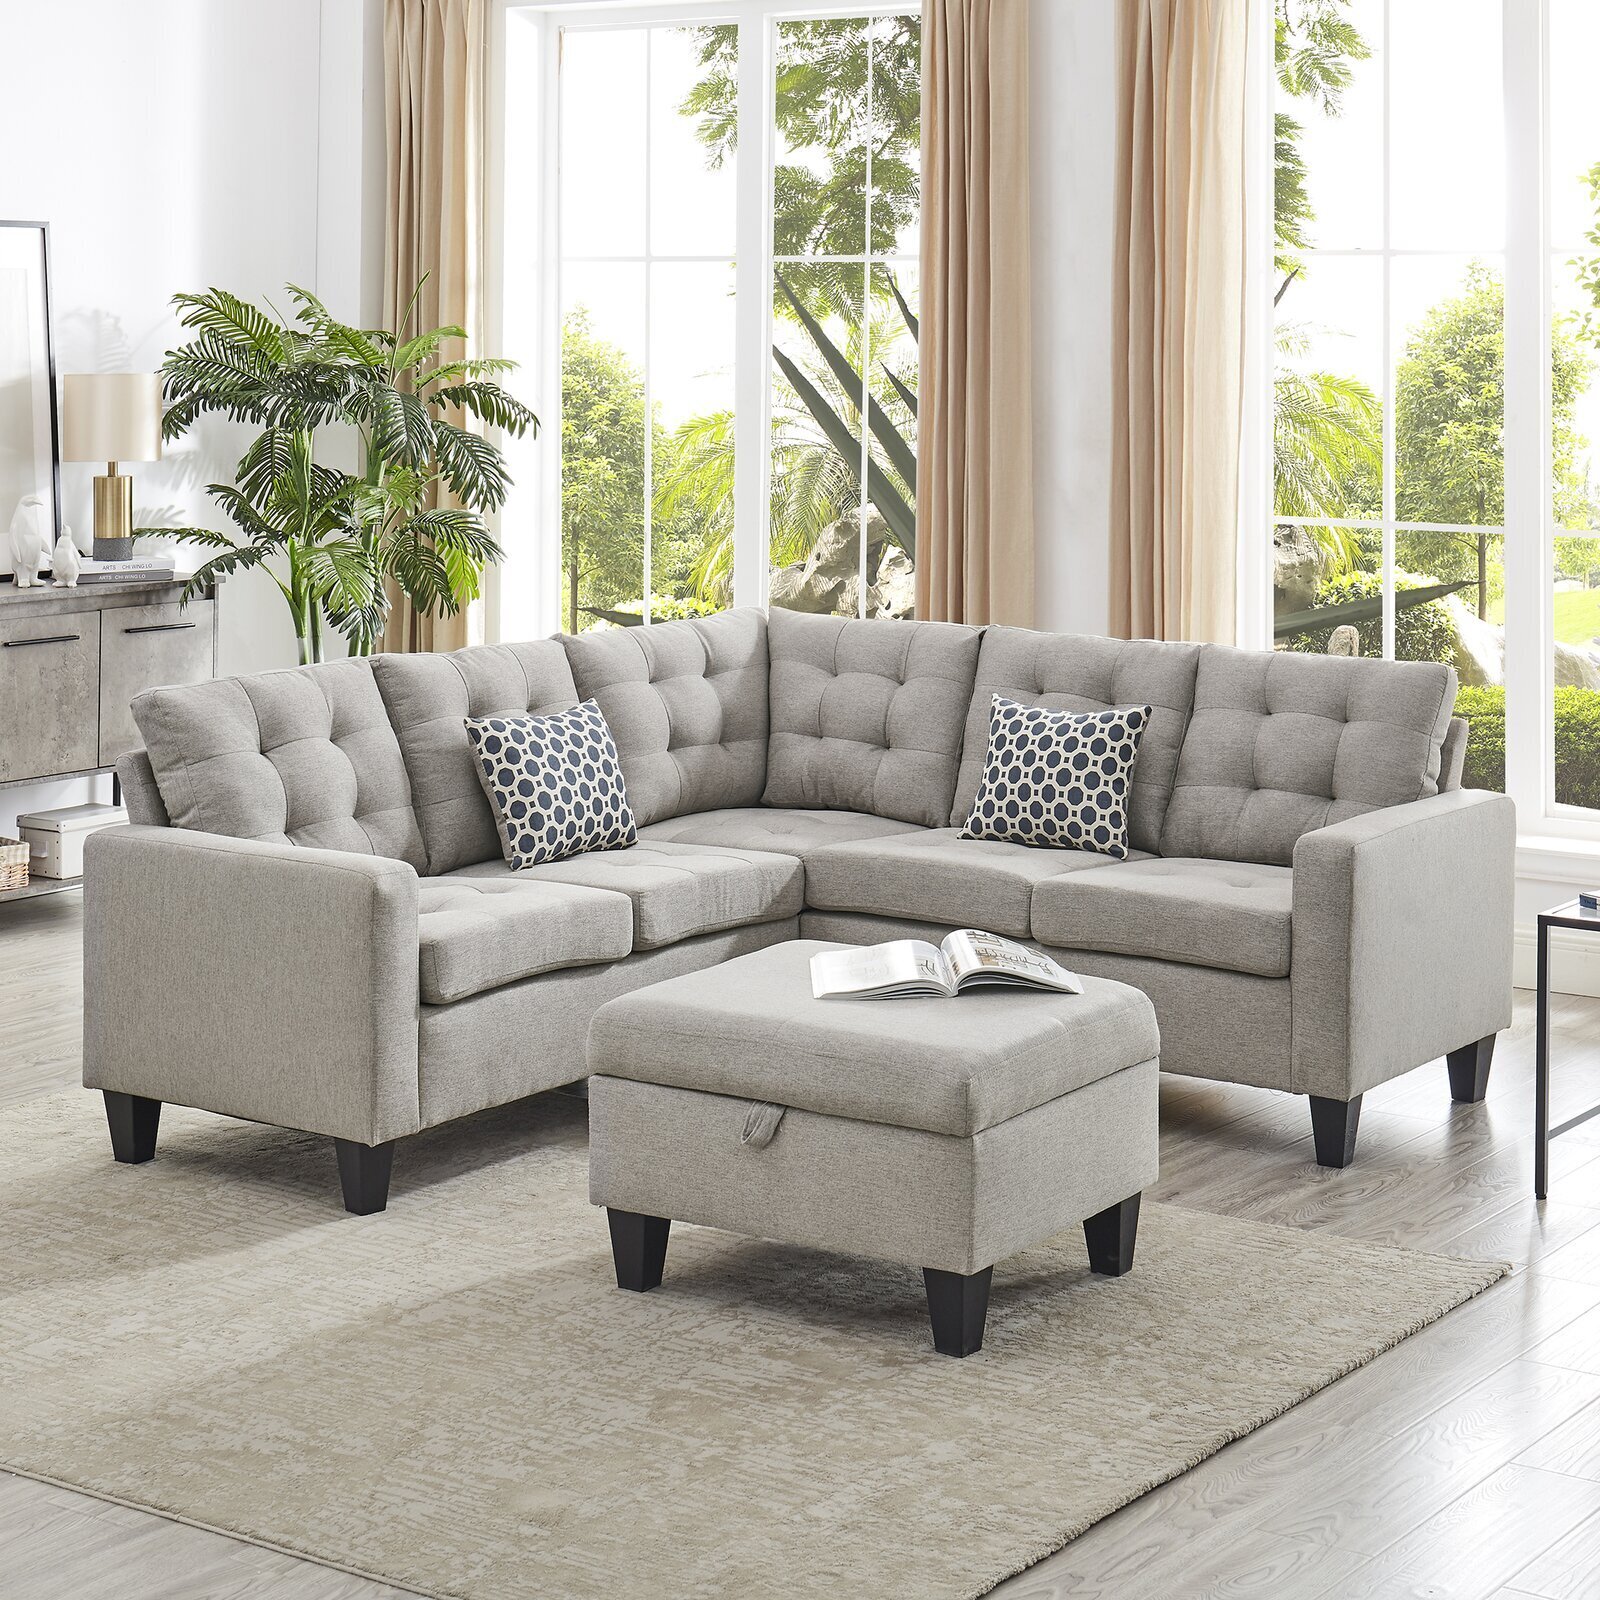 Small Corner Sectional Sofas   Ideas on Foter